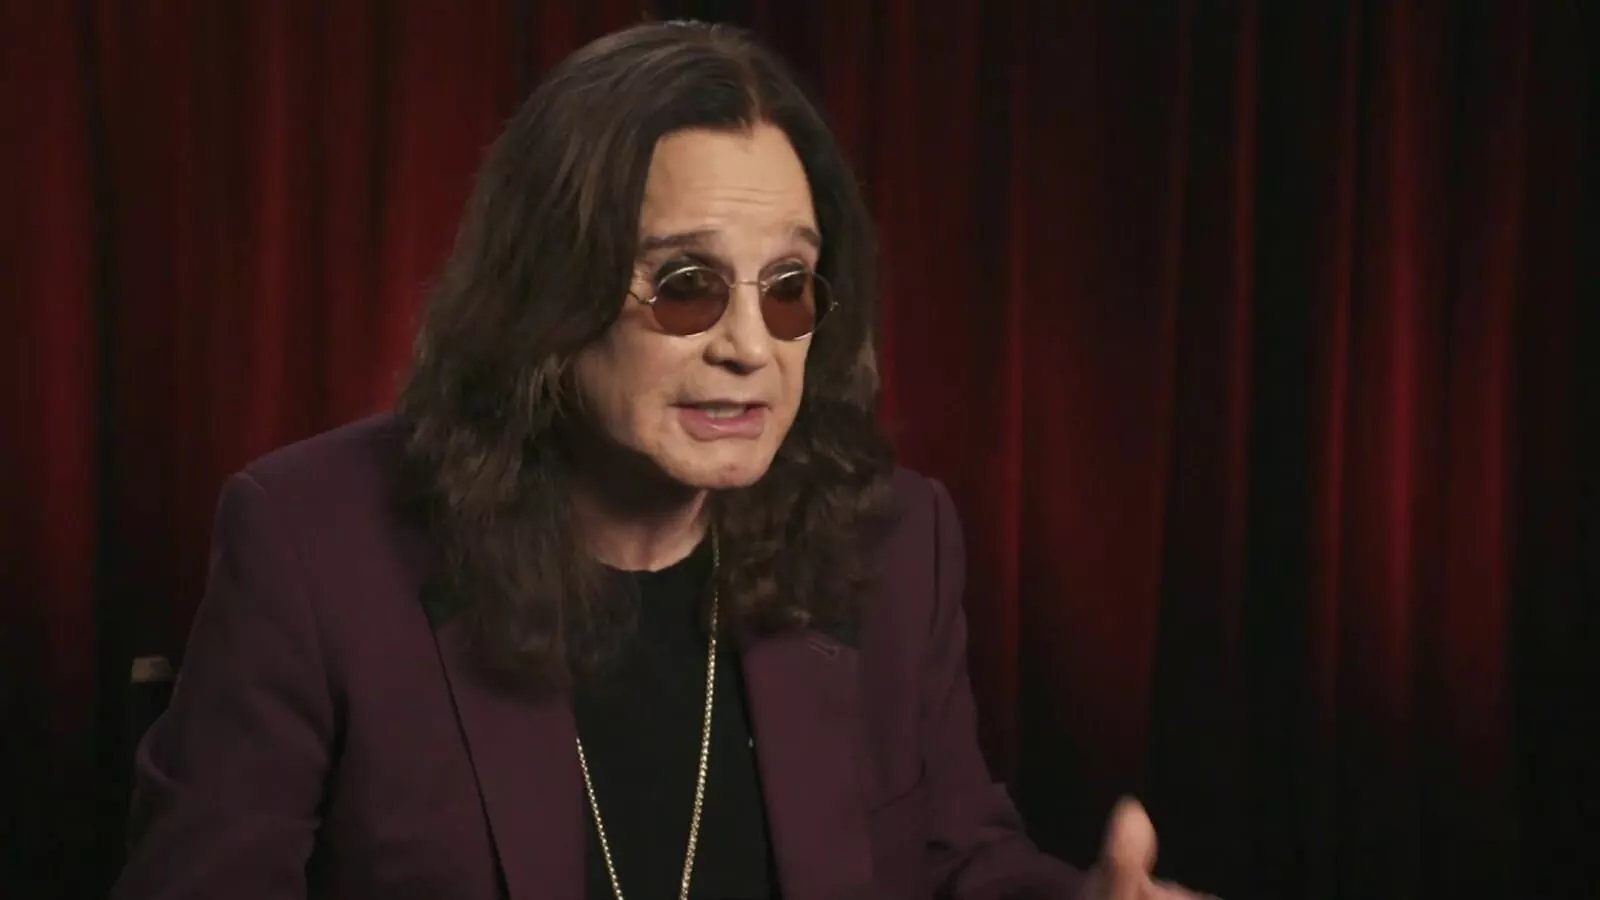 Ozzy Osbourne new photos revealed during his Parkinson's battle